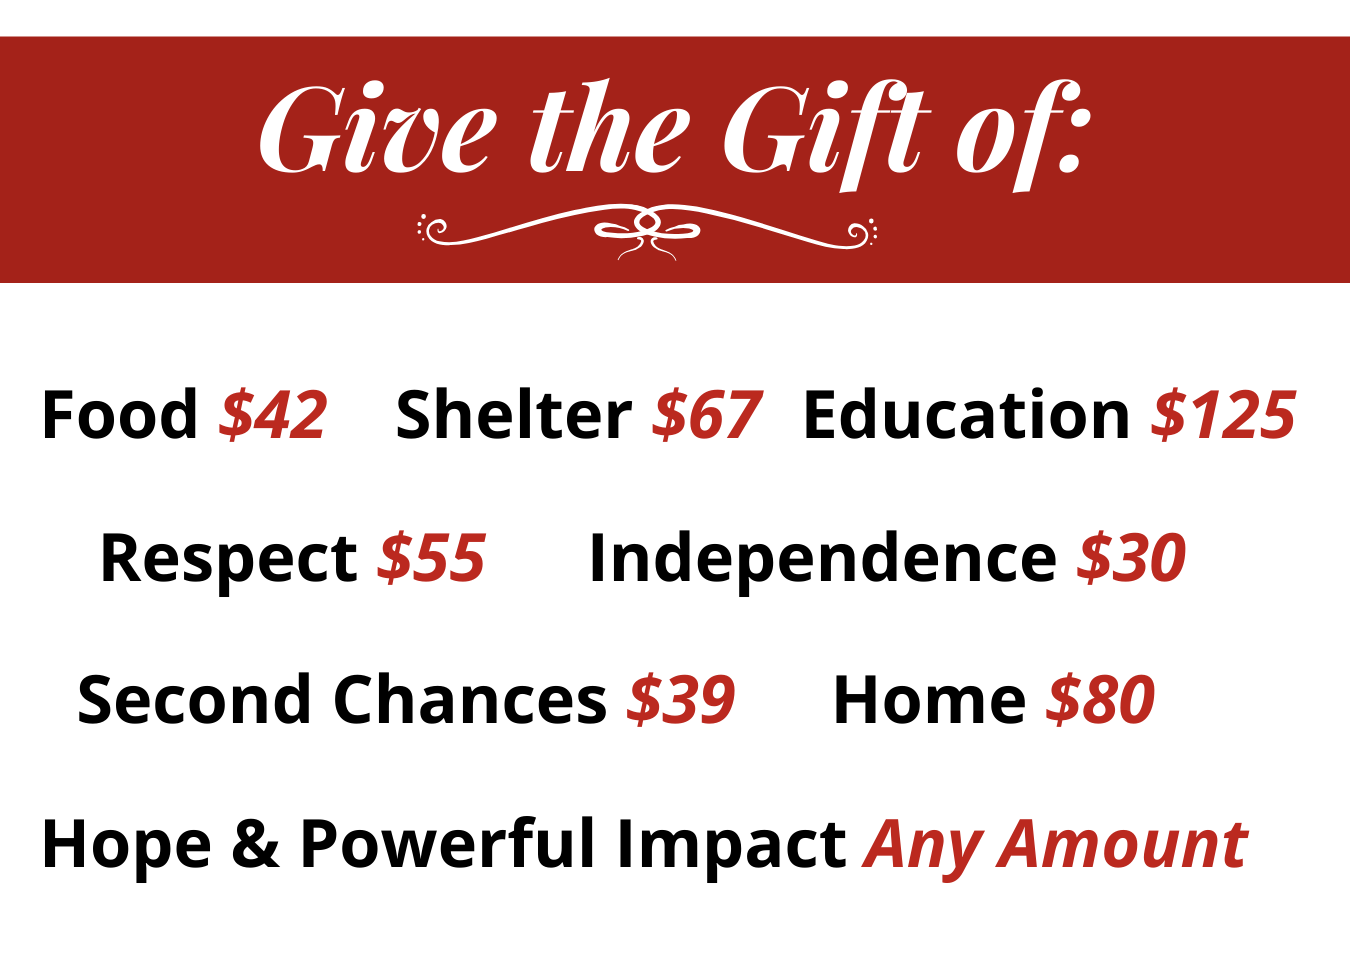 Gift of Shelter $67, Food $42, Respect $55, Second Chances $